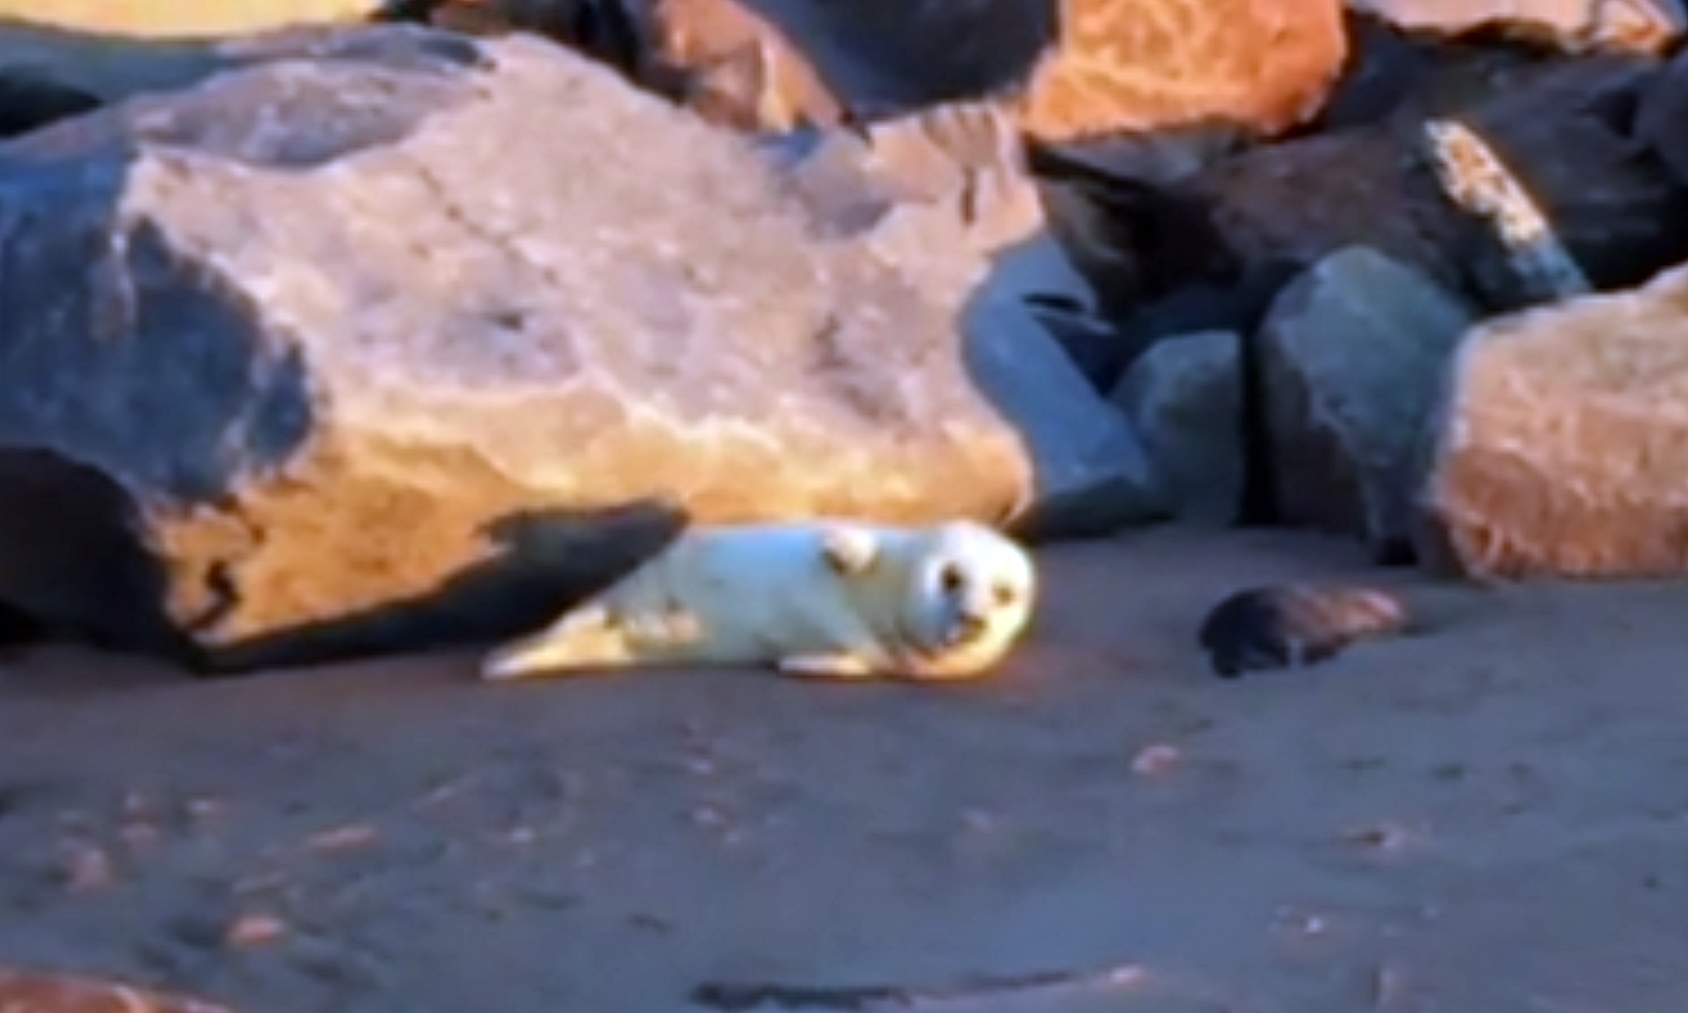 The seal pup was first spotted and left alone in the morning, when it was said to appear to be in good condition.